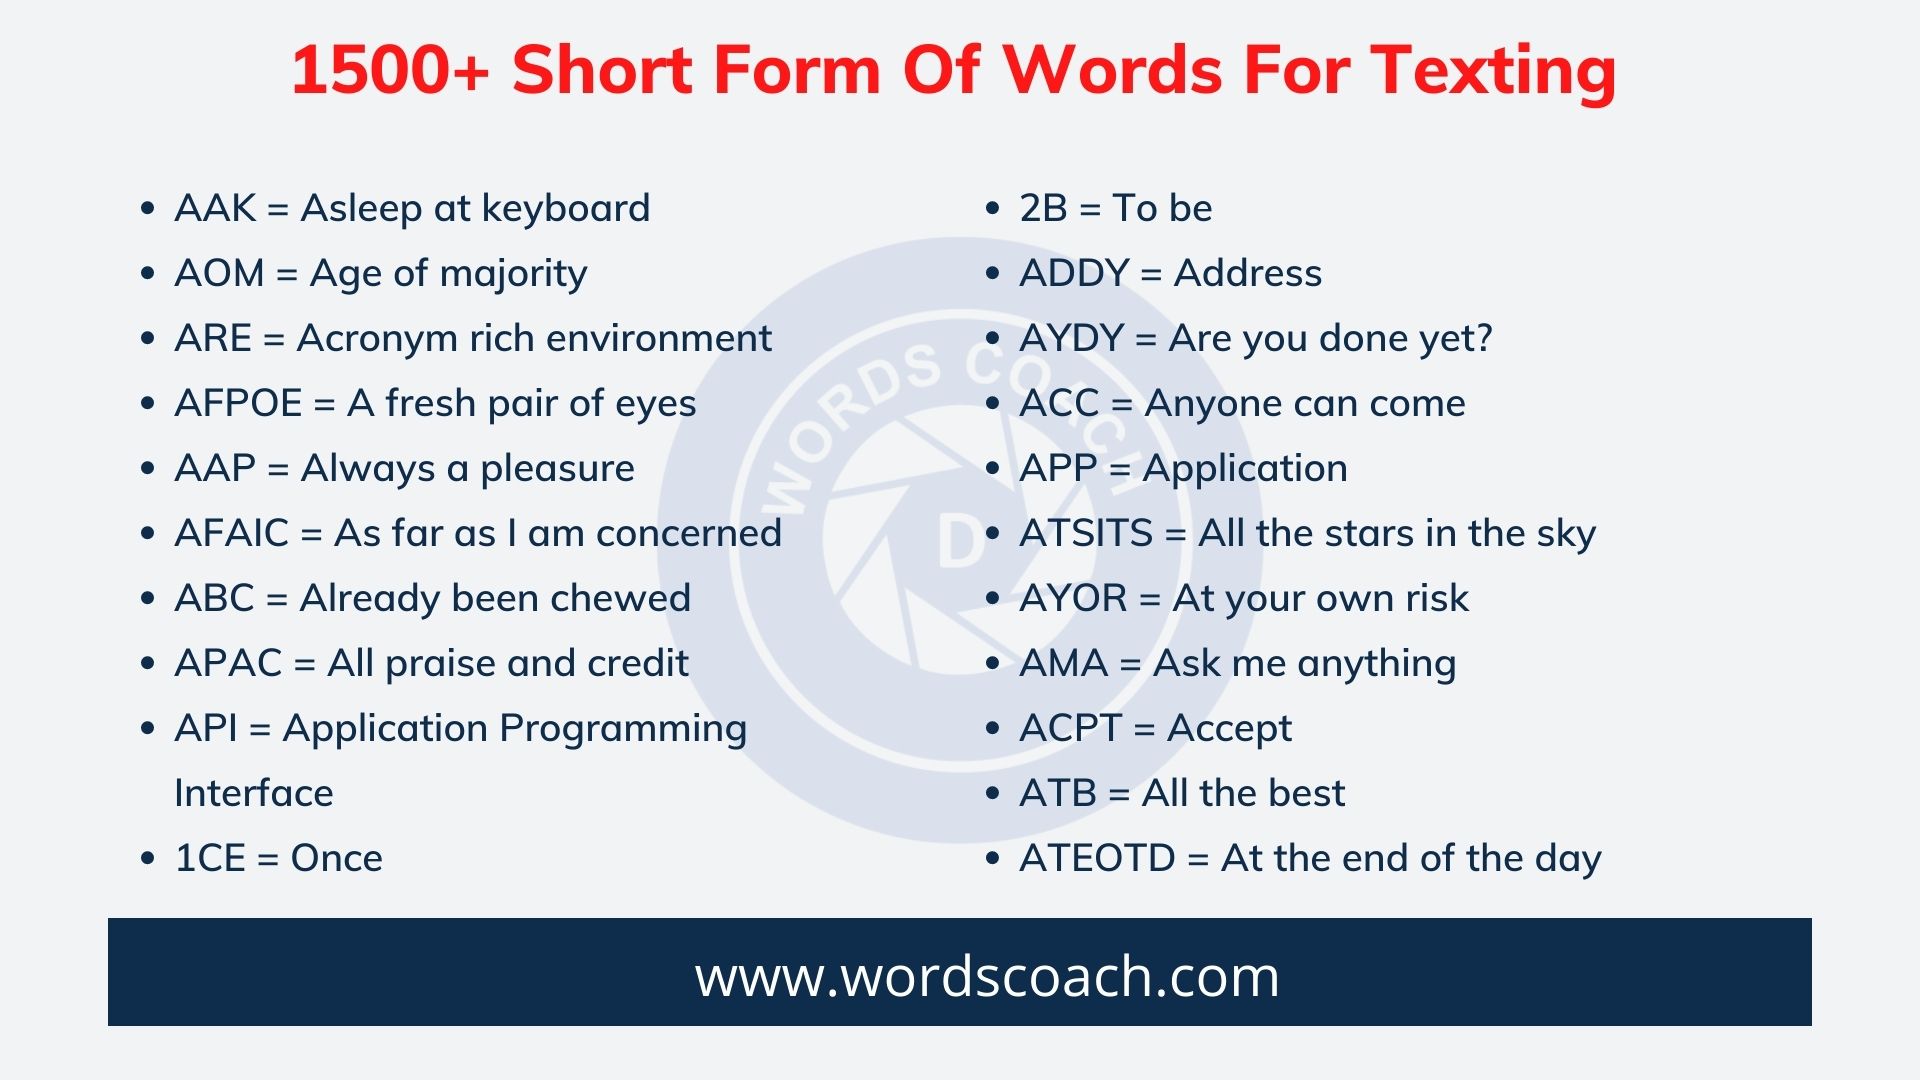 1500+ Short Form Of Words For Texting